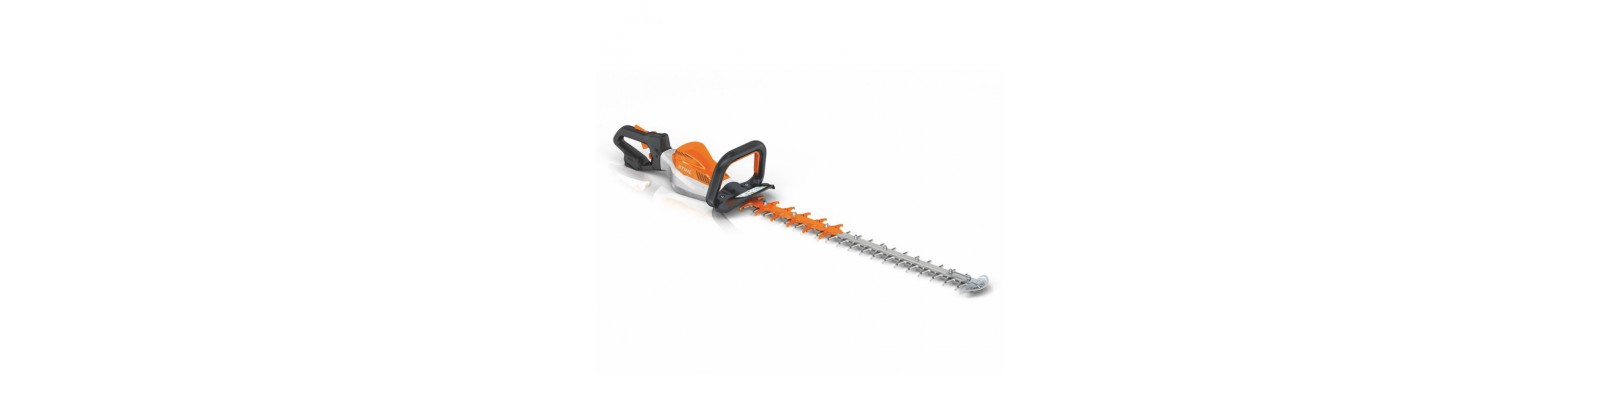 Battery Hedge Trimmers 